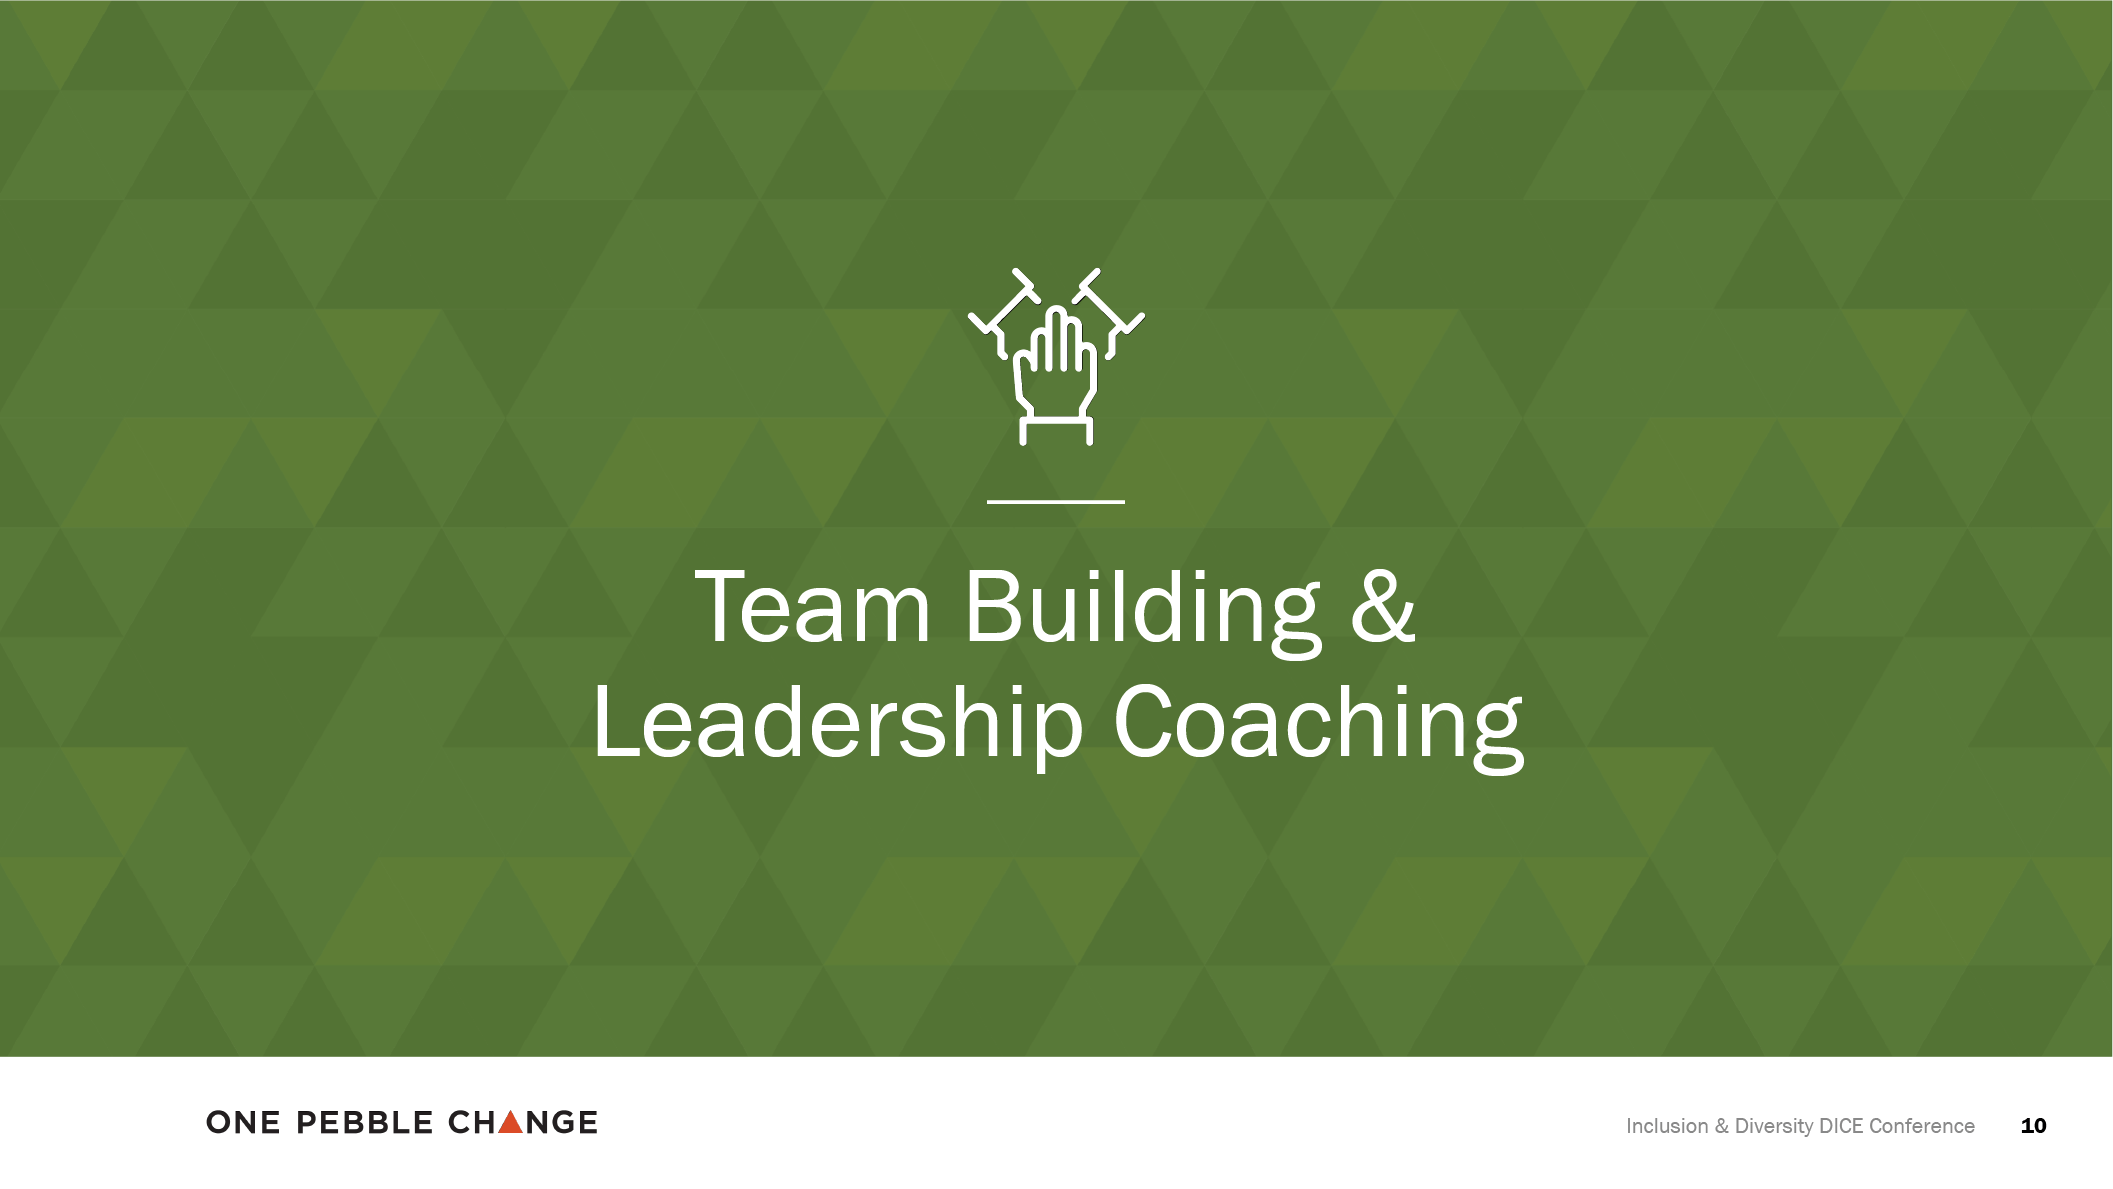 One Pebble Change powerpoint Team Building & Leadership Coaching page